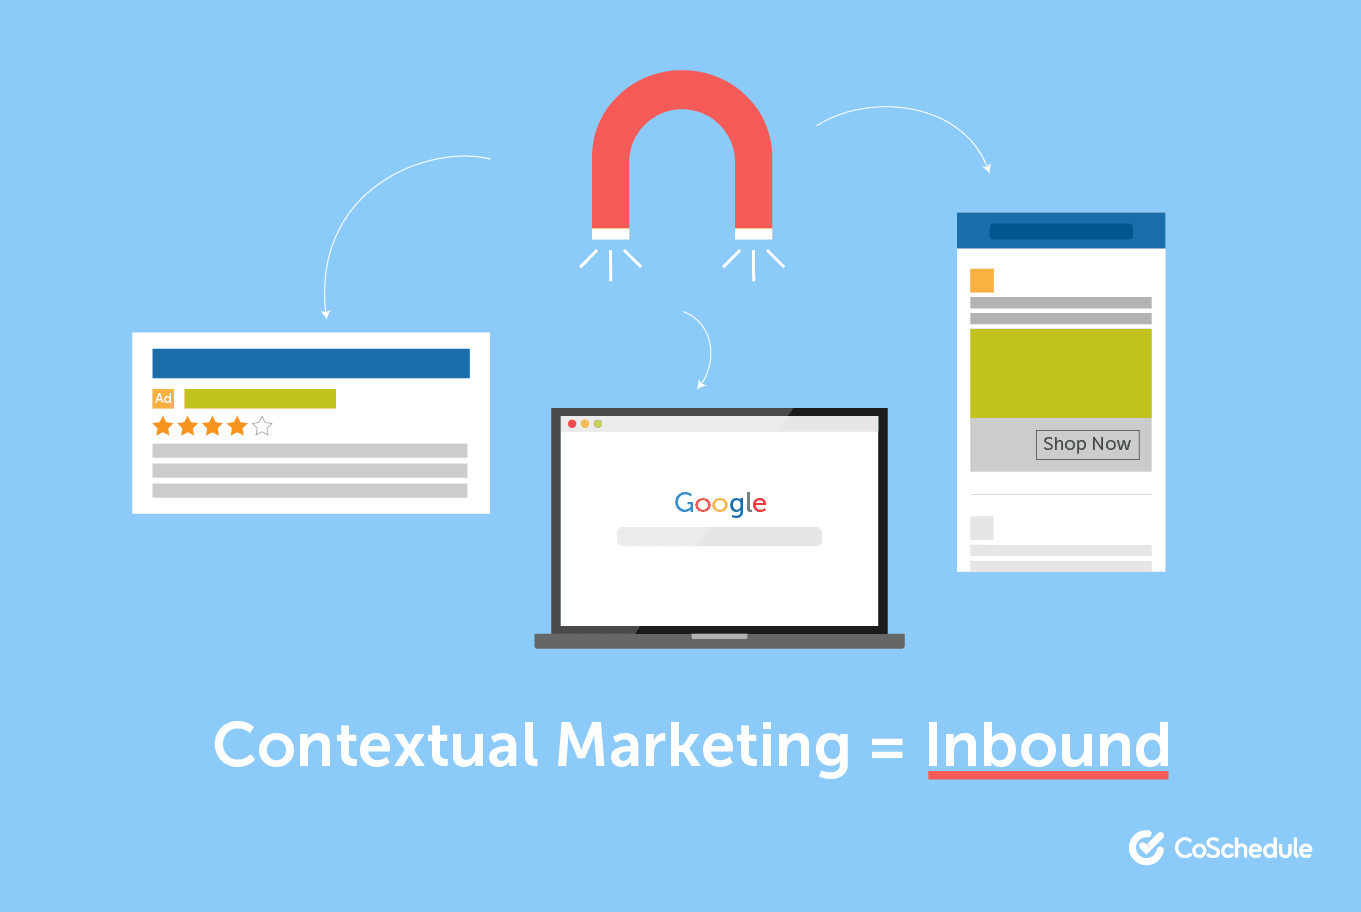 Contextual marketing is the same as inbound marketing